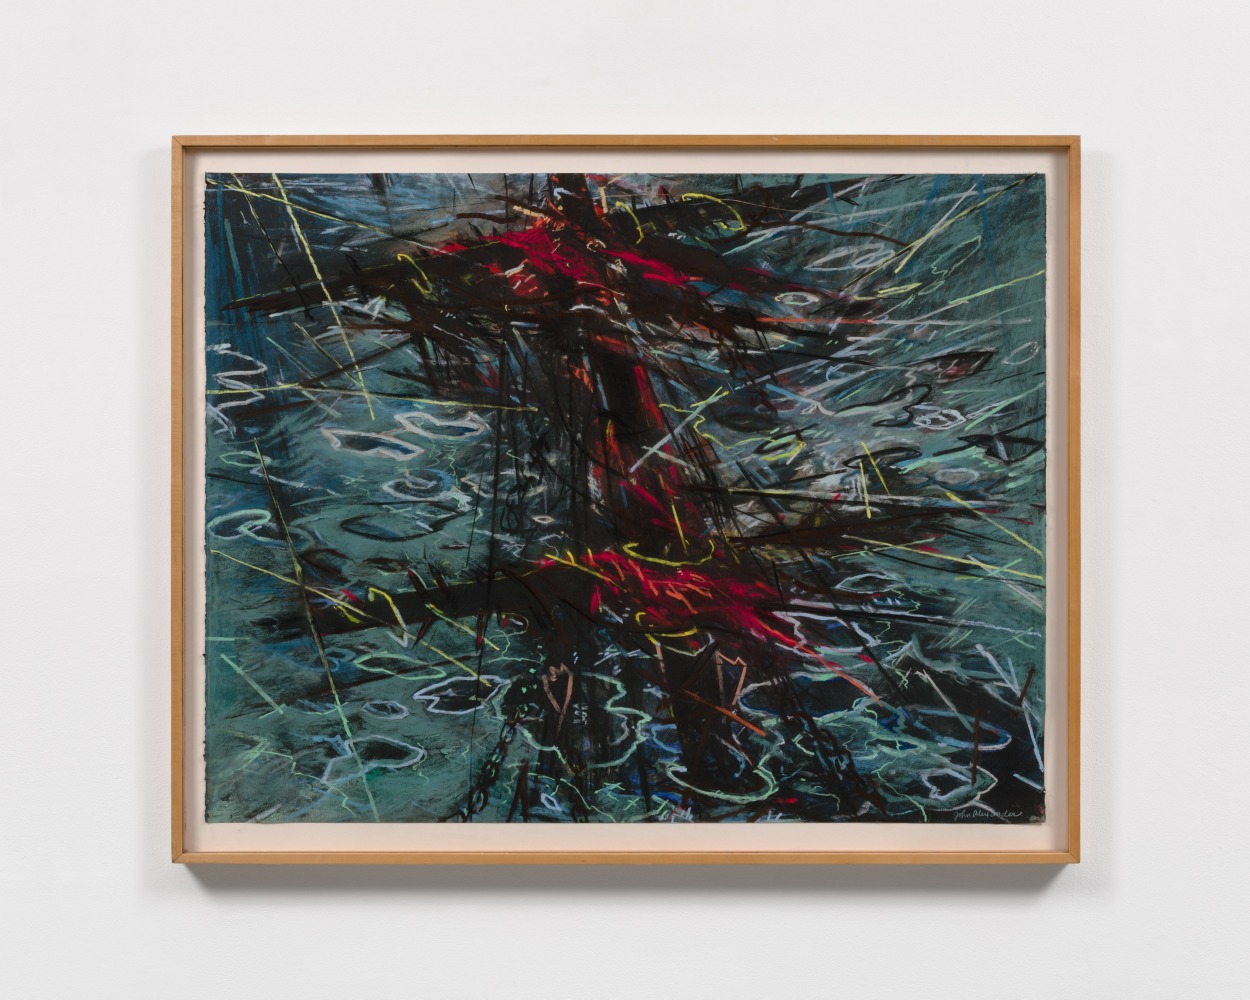 Shipwreck, 1986

pastel on paper mounted on museum board

40 1/2 x 52 1/2 in. / 102.9 x 133.3 cm